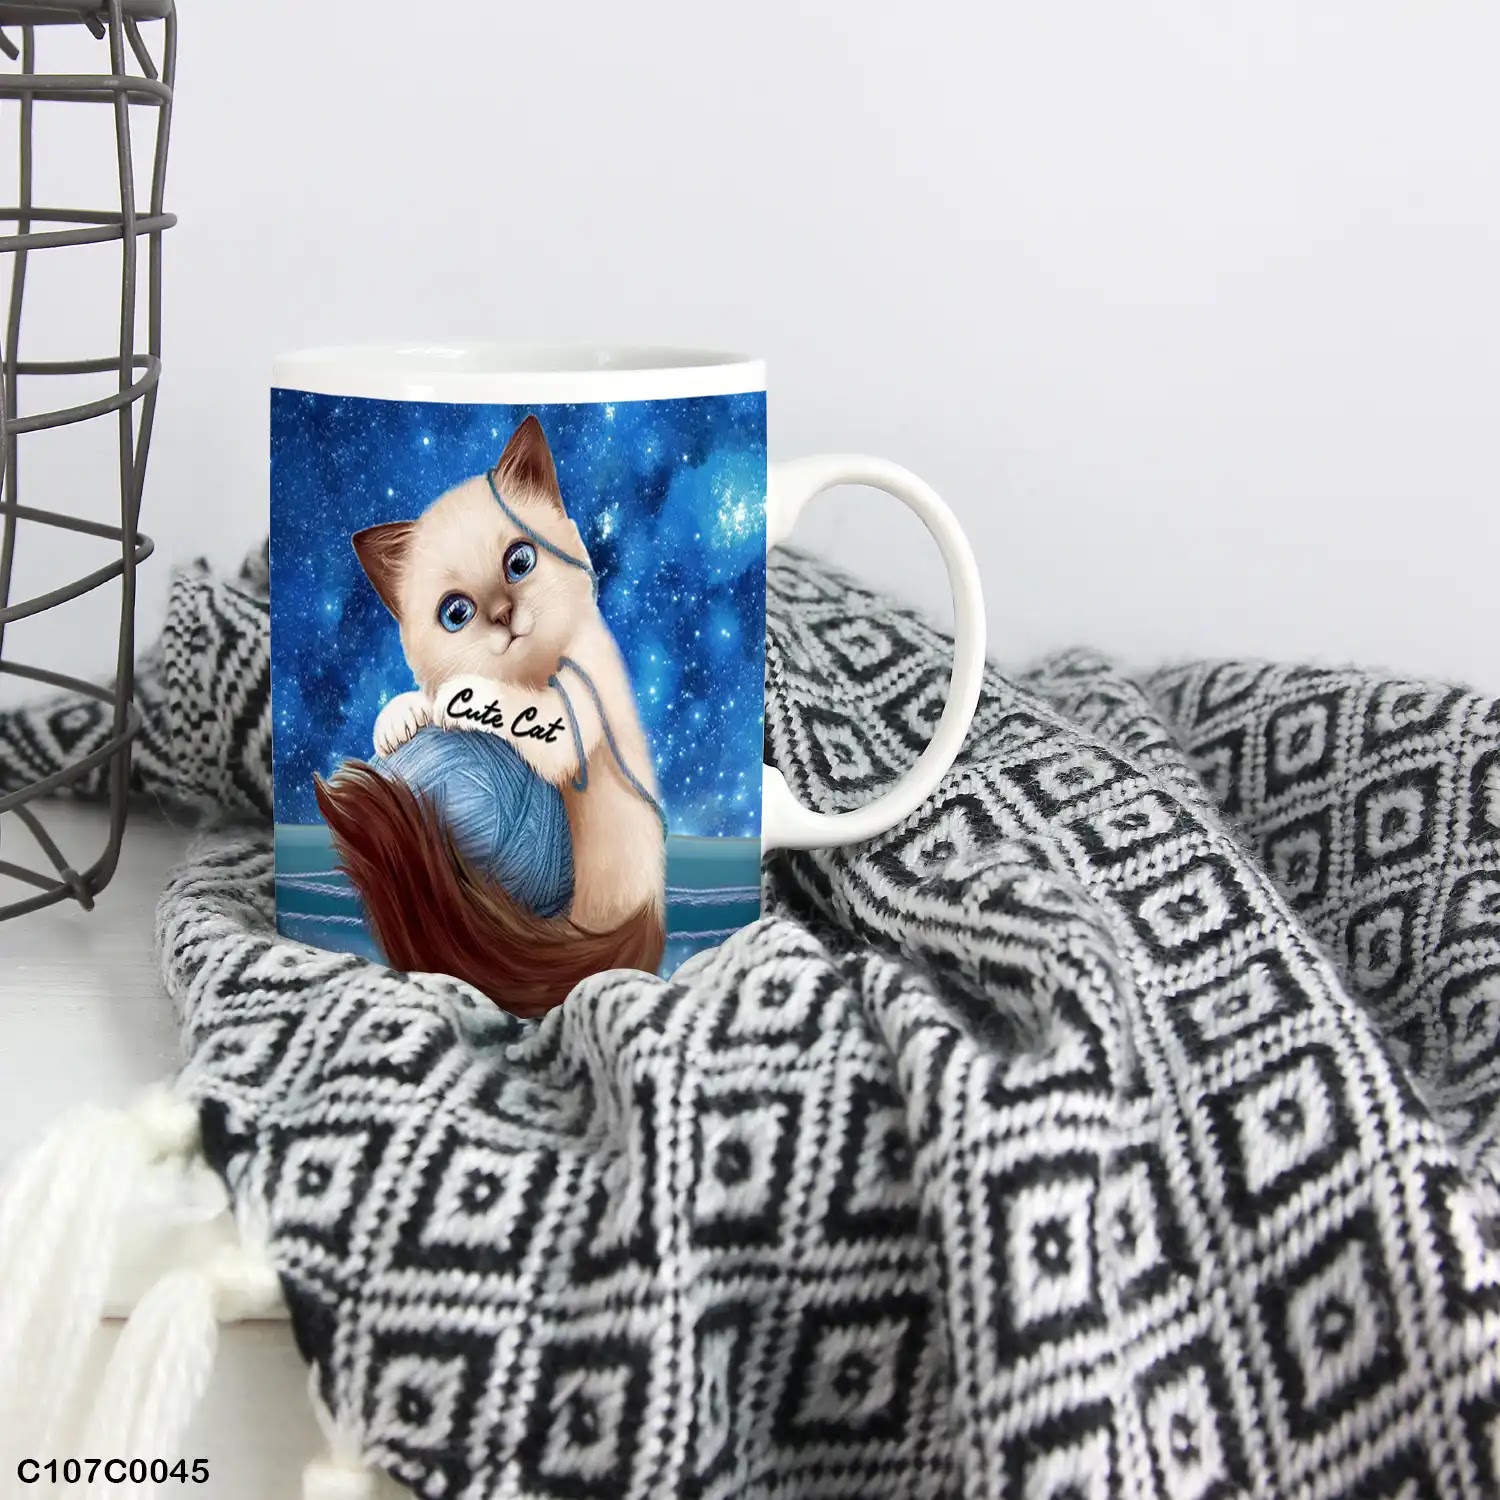 A mug (cup) printed with an image of a cat playing with wool